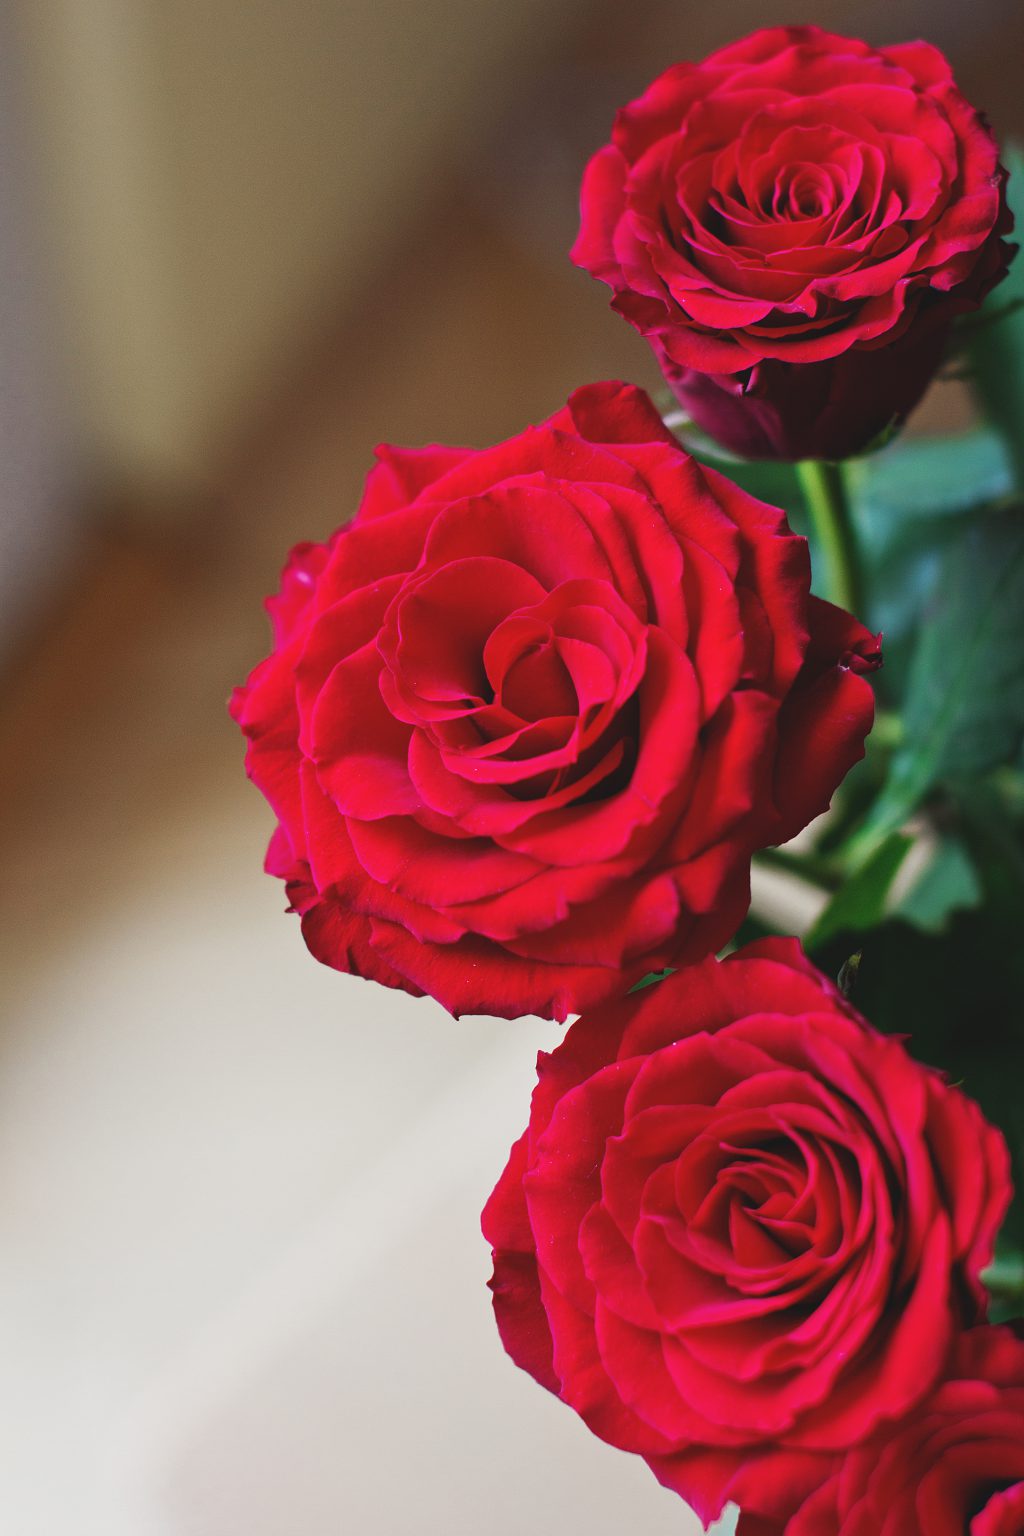 Red roses - free stock photo